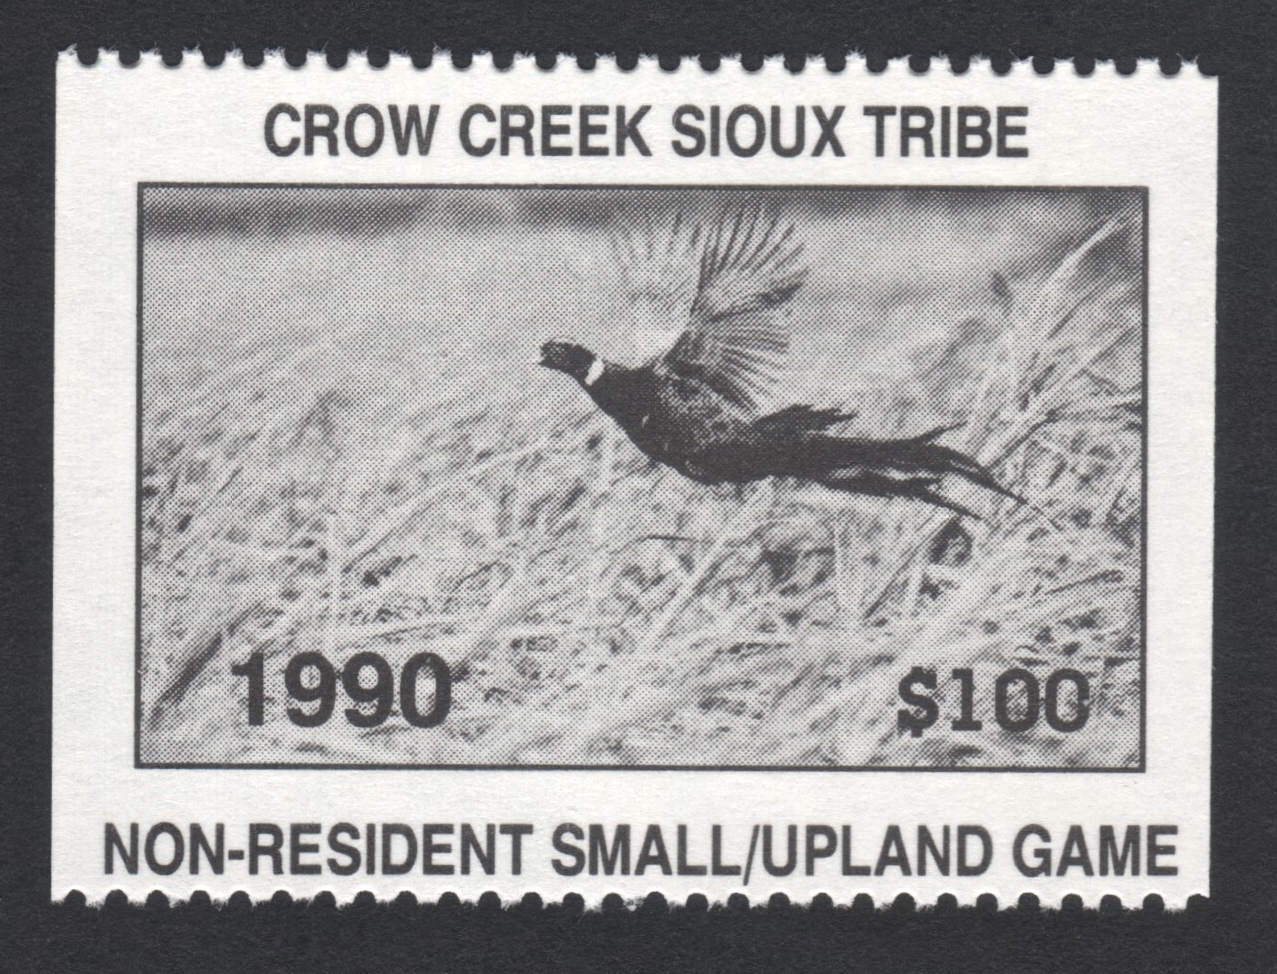 1990 Error Crow Creek NR Small/Upland Game Missing Serial Number